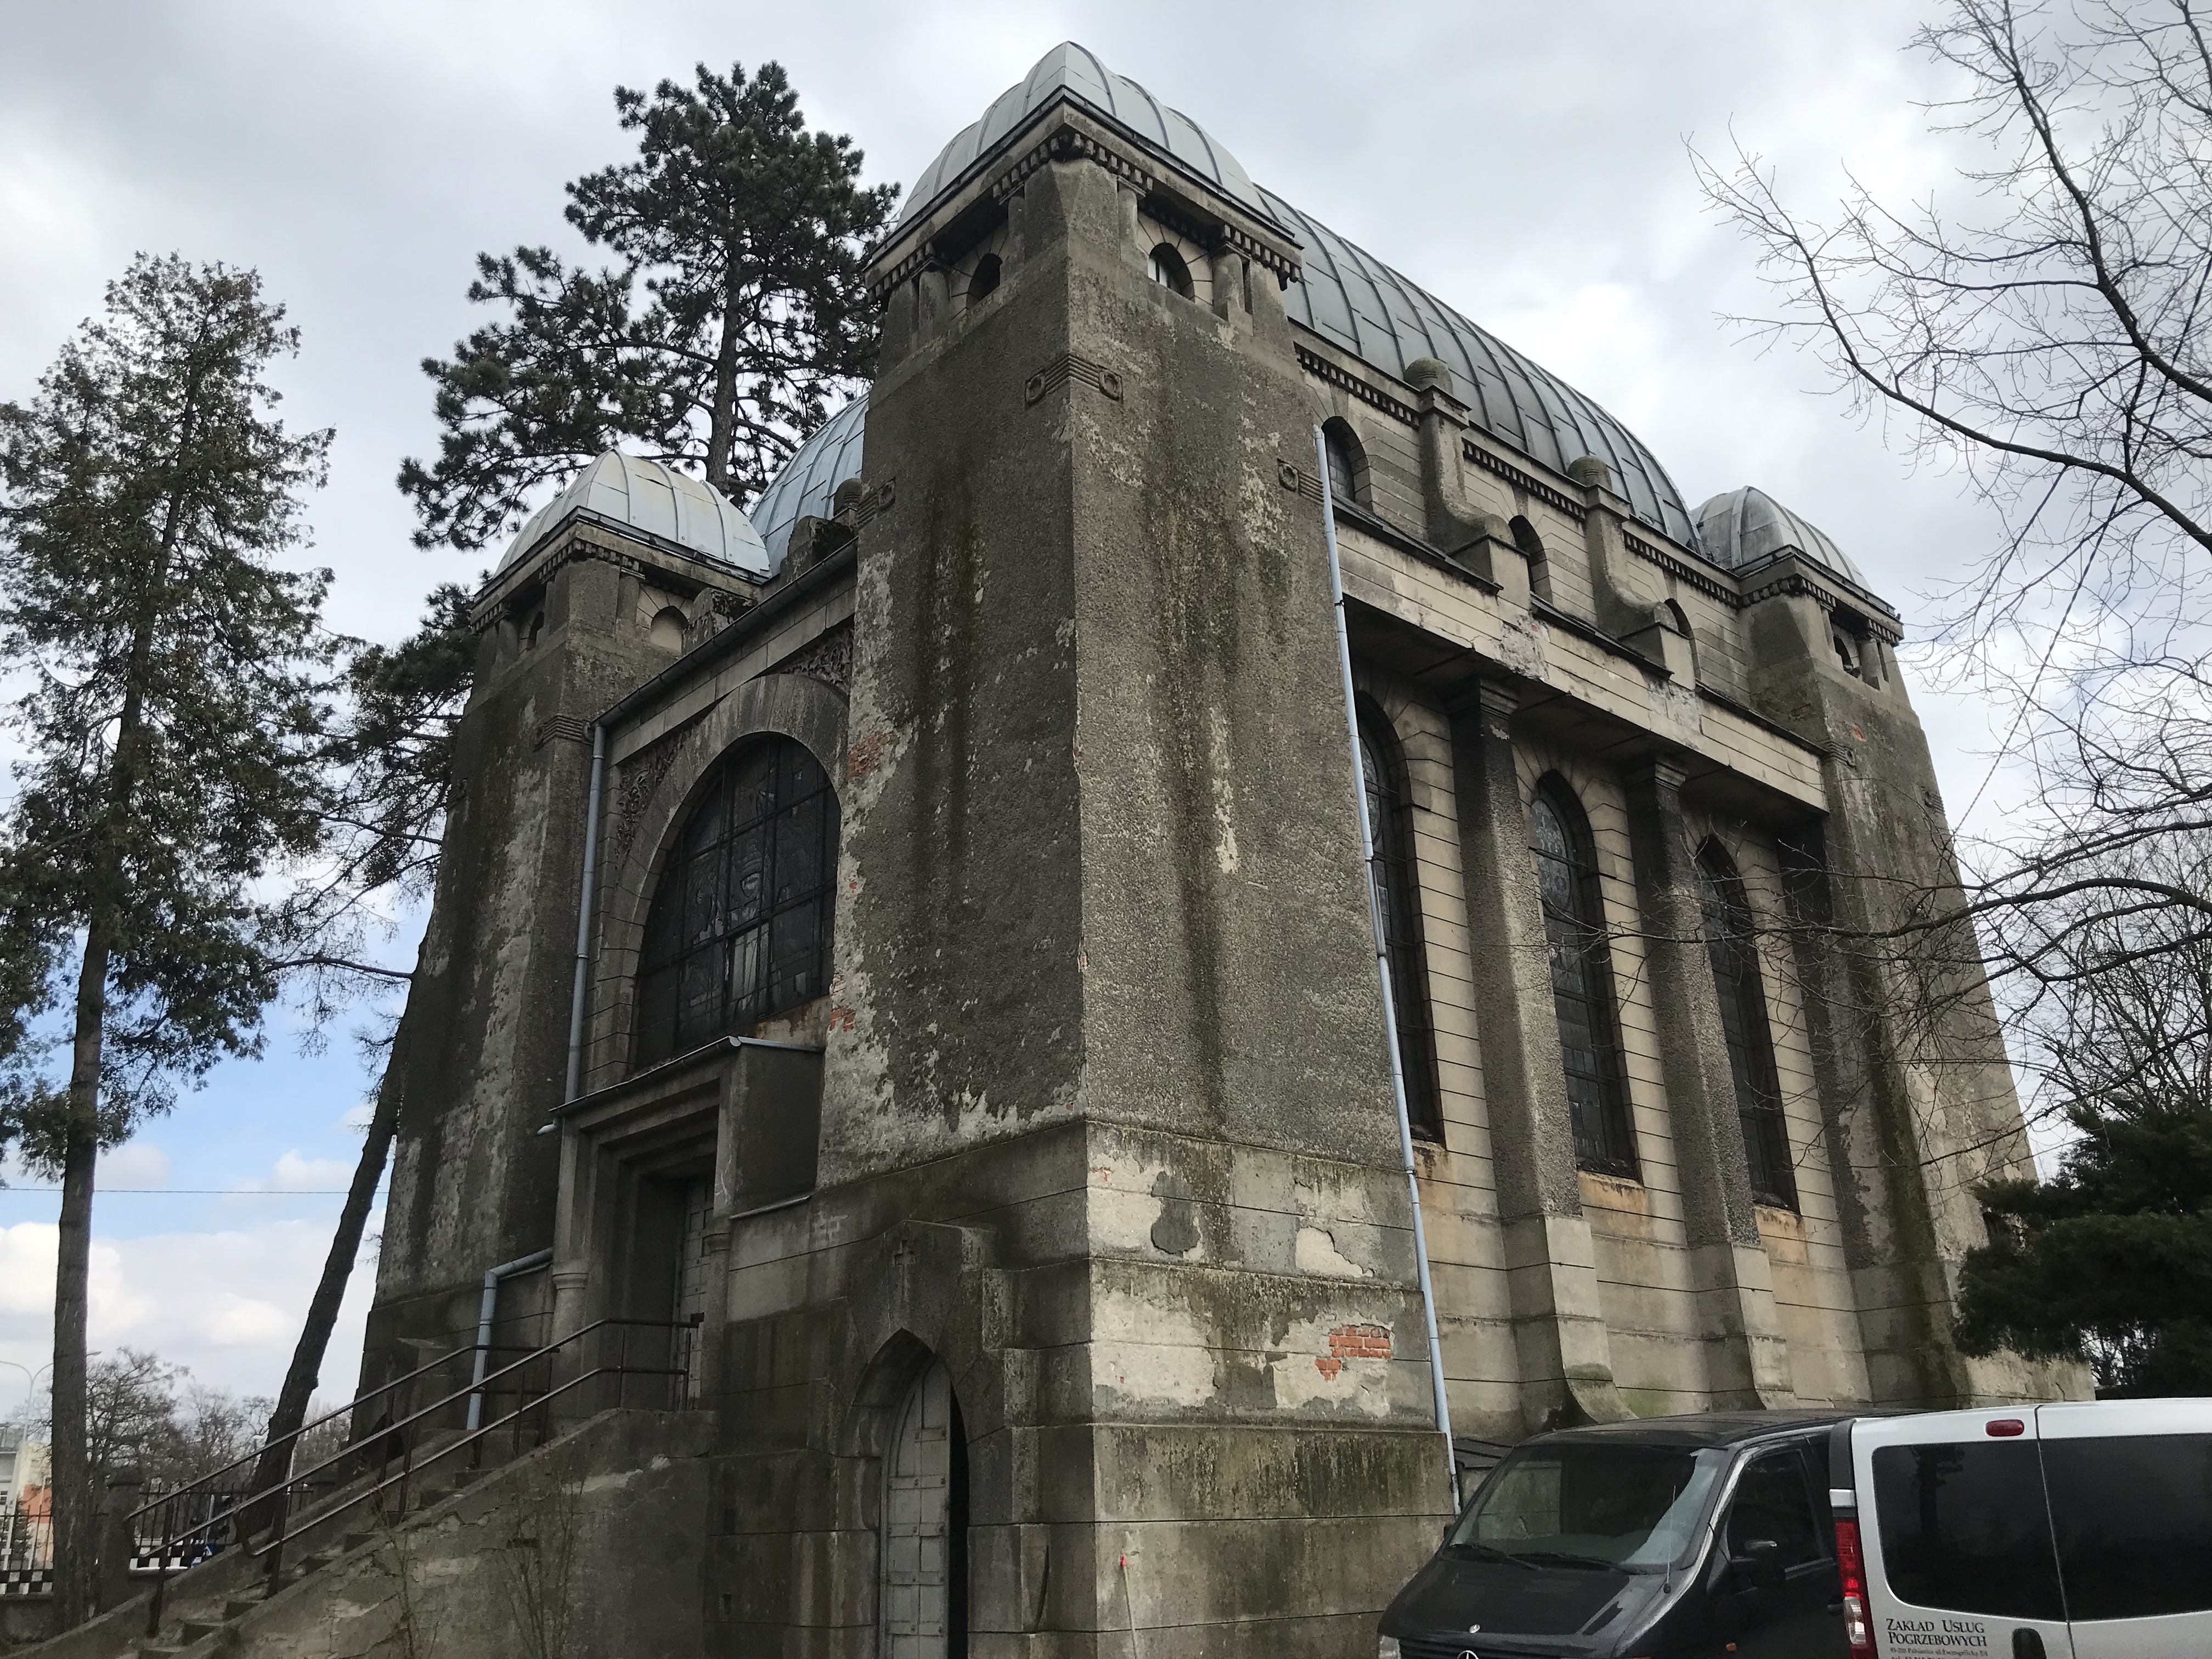 The exterior of the Kindler Chapel, 2019.